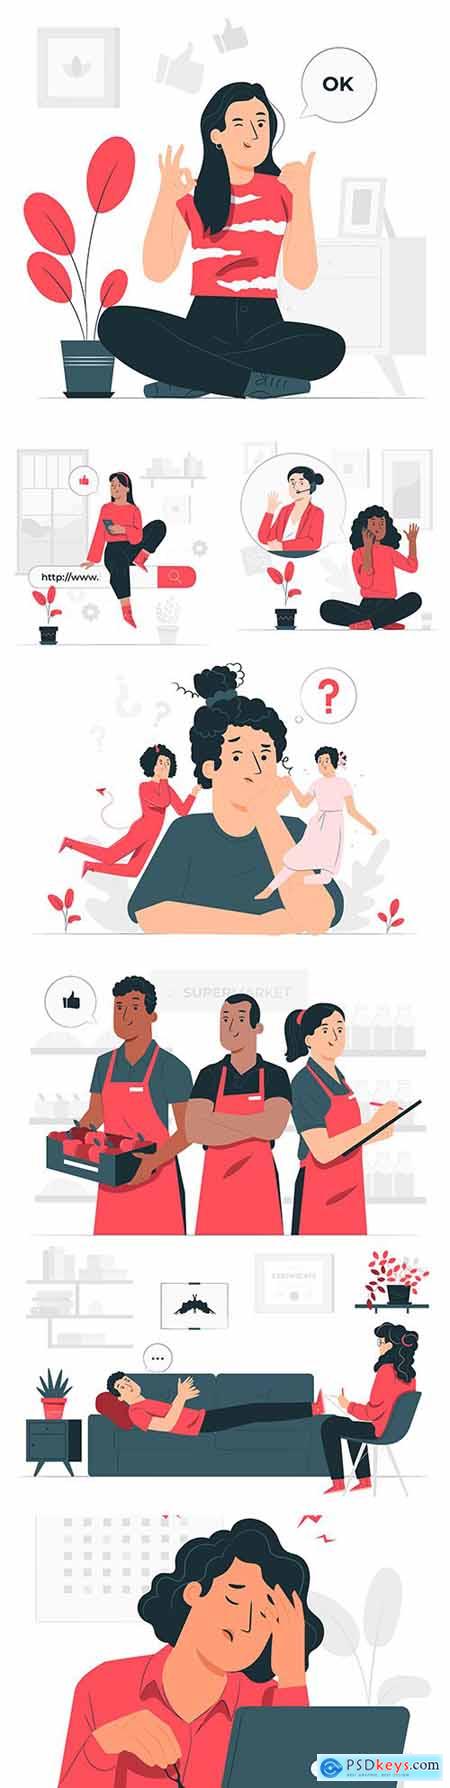 People different lifestyles and professions illustration concept